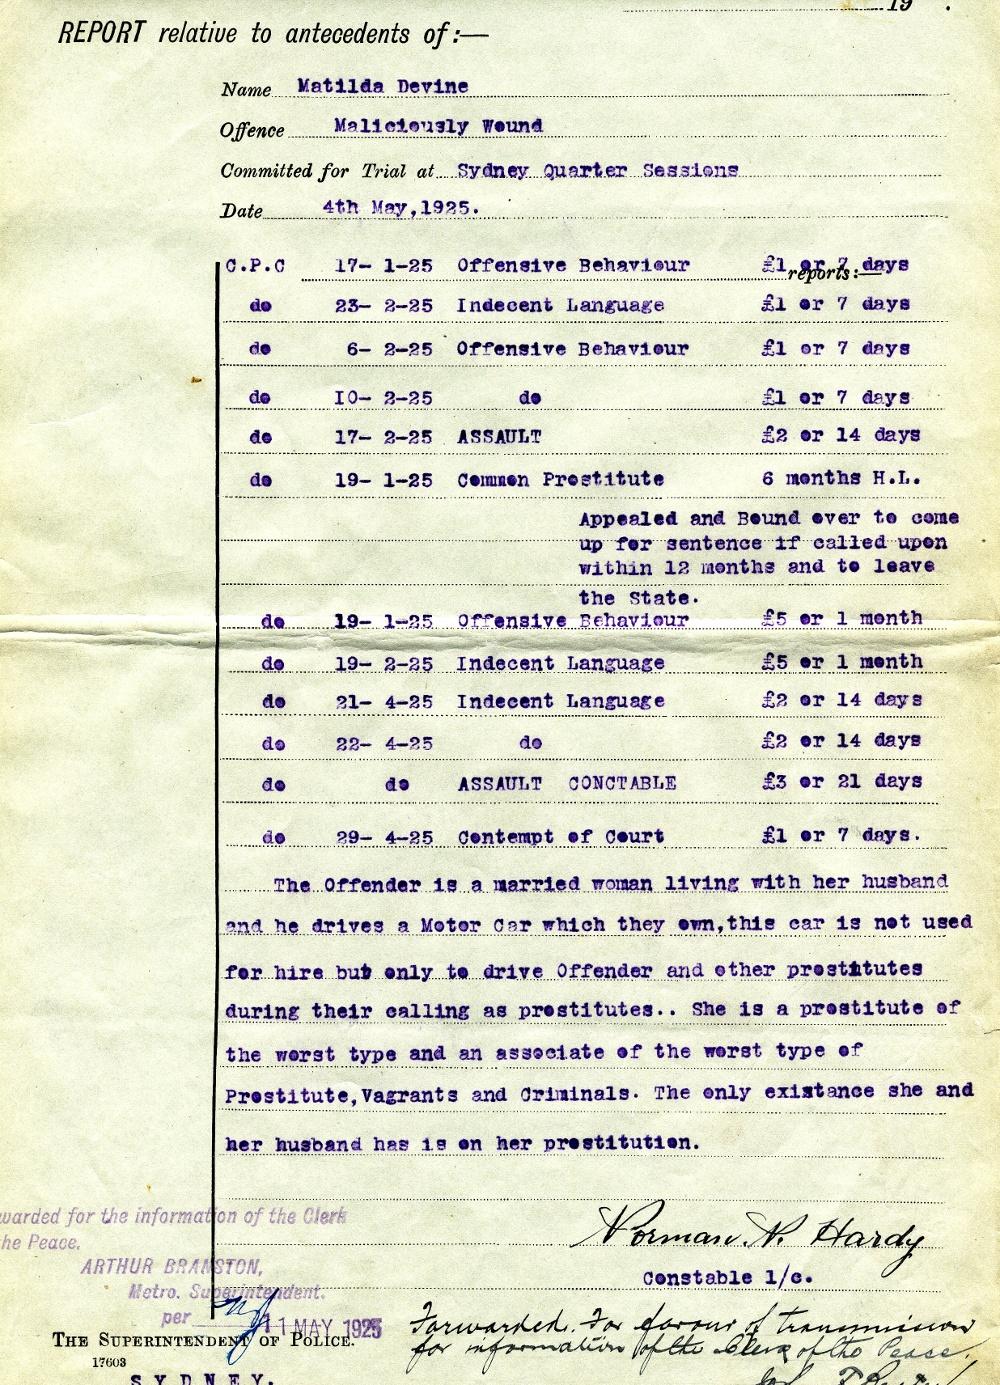 Typed document showing offence record for Matilda Devine